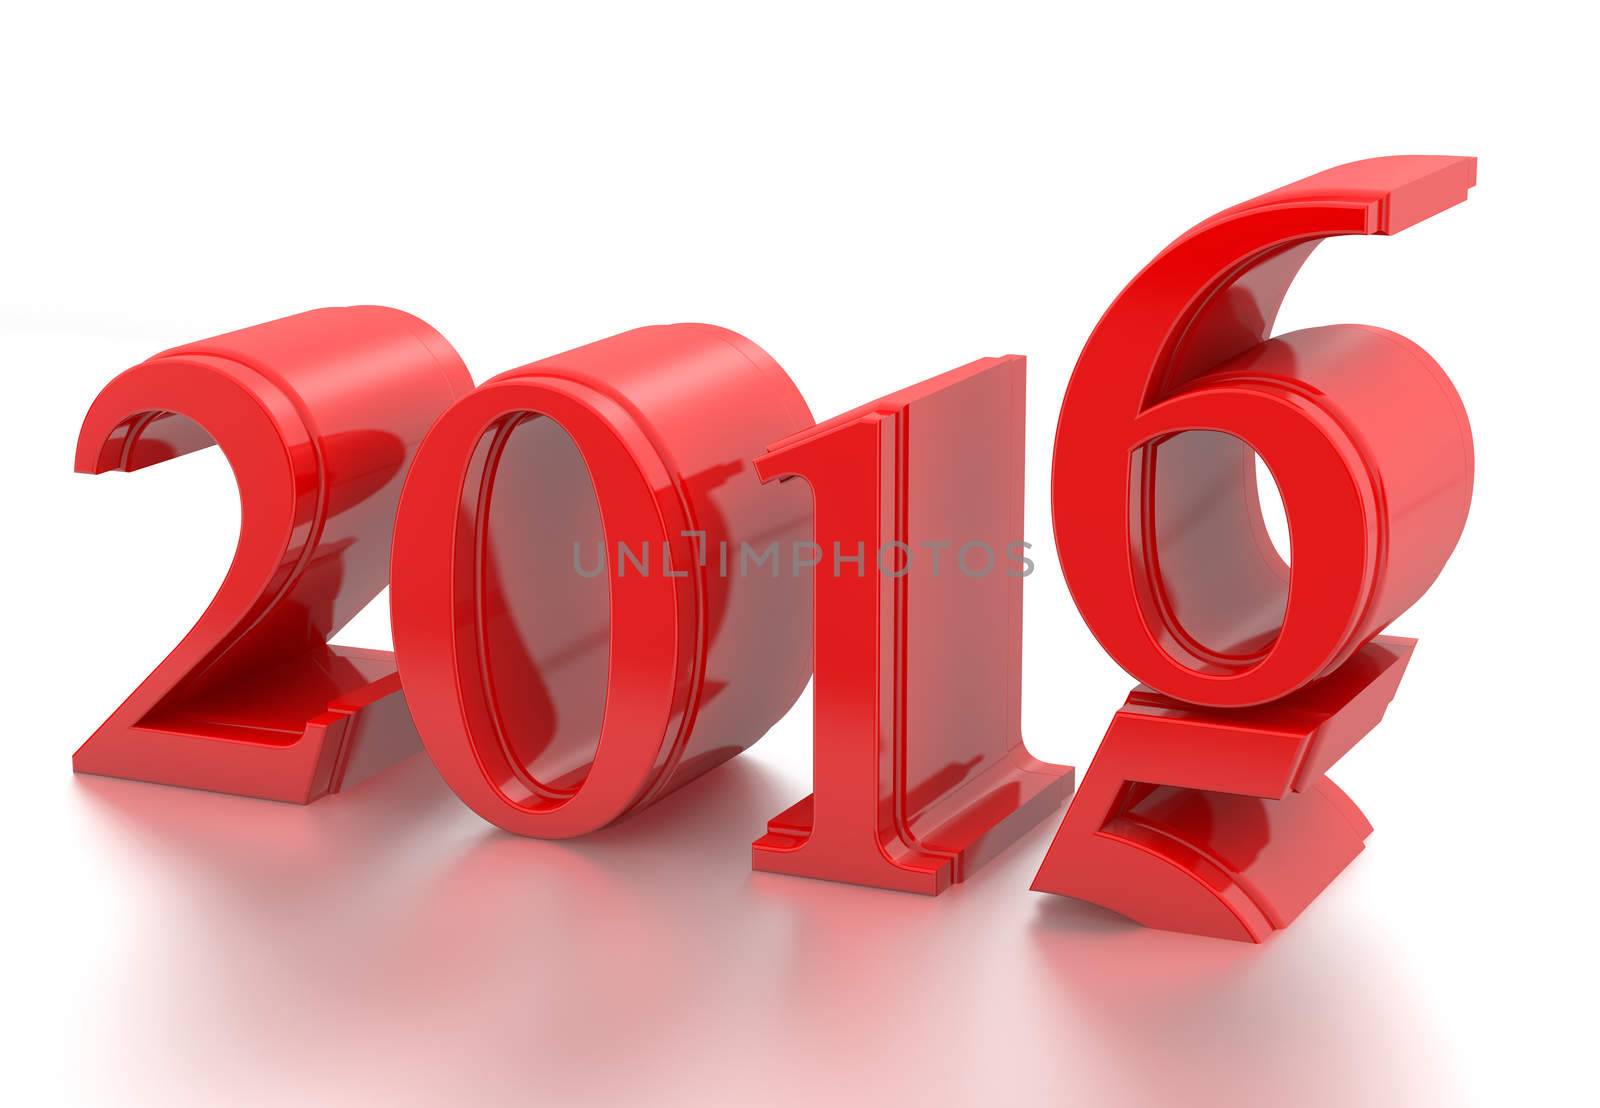 2015-2016 change represents the new year 2016 by manaemedia